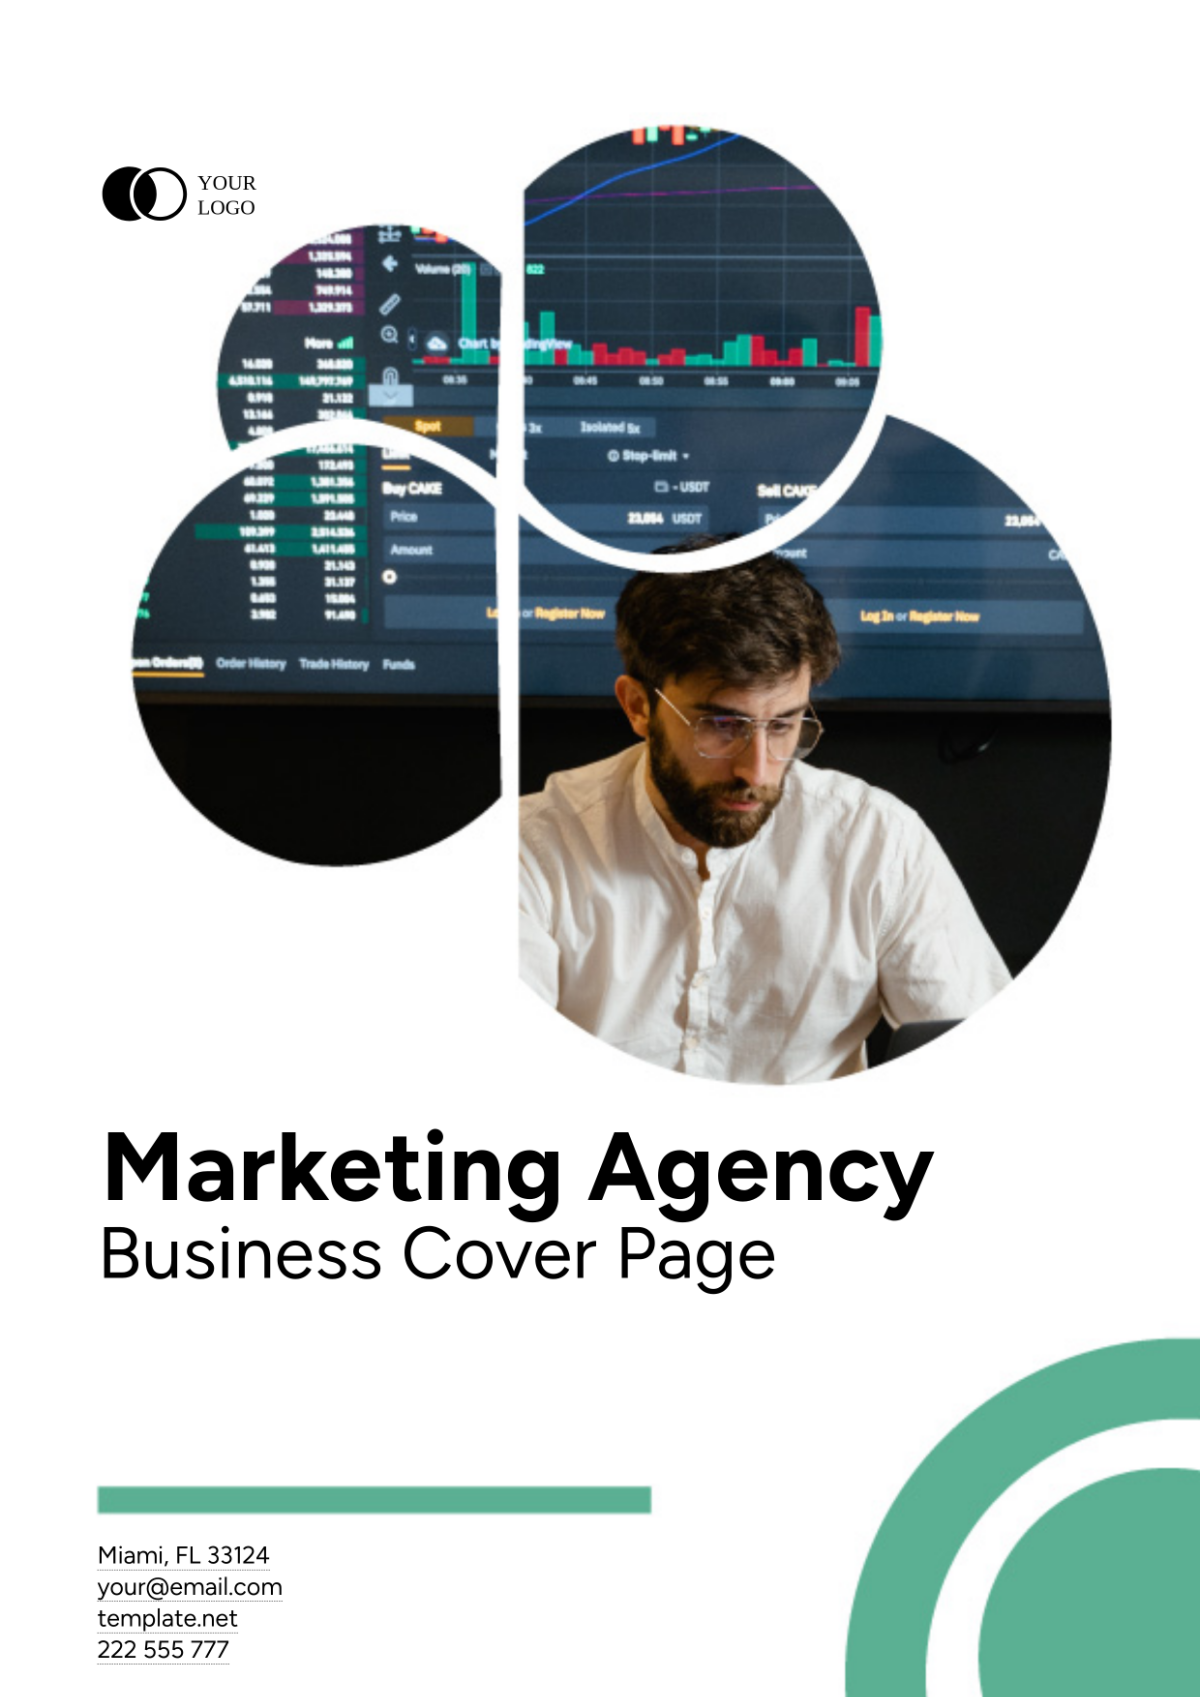 Marketing Agency Business Cover Page